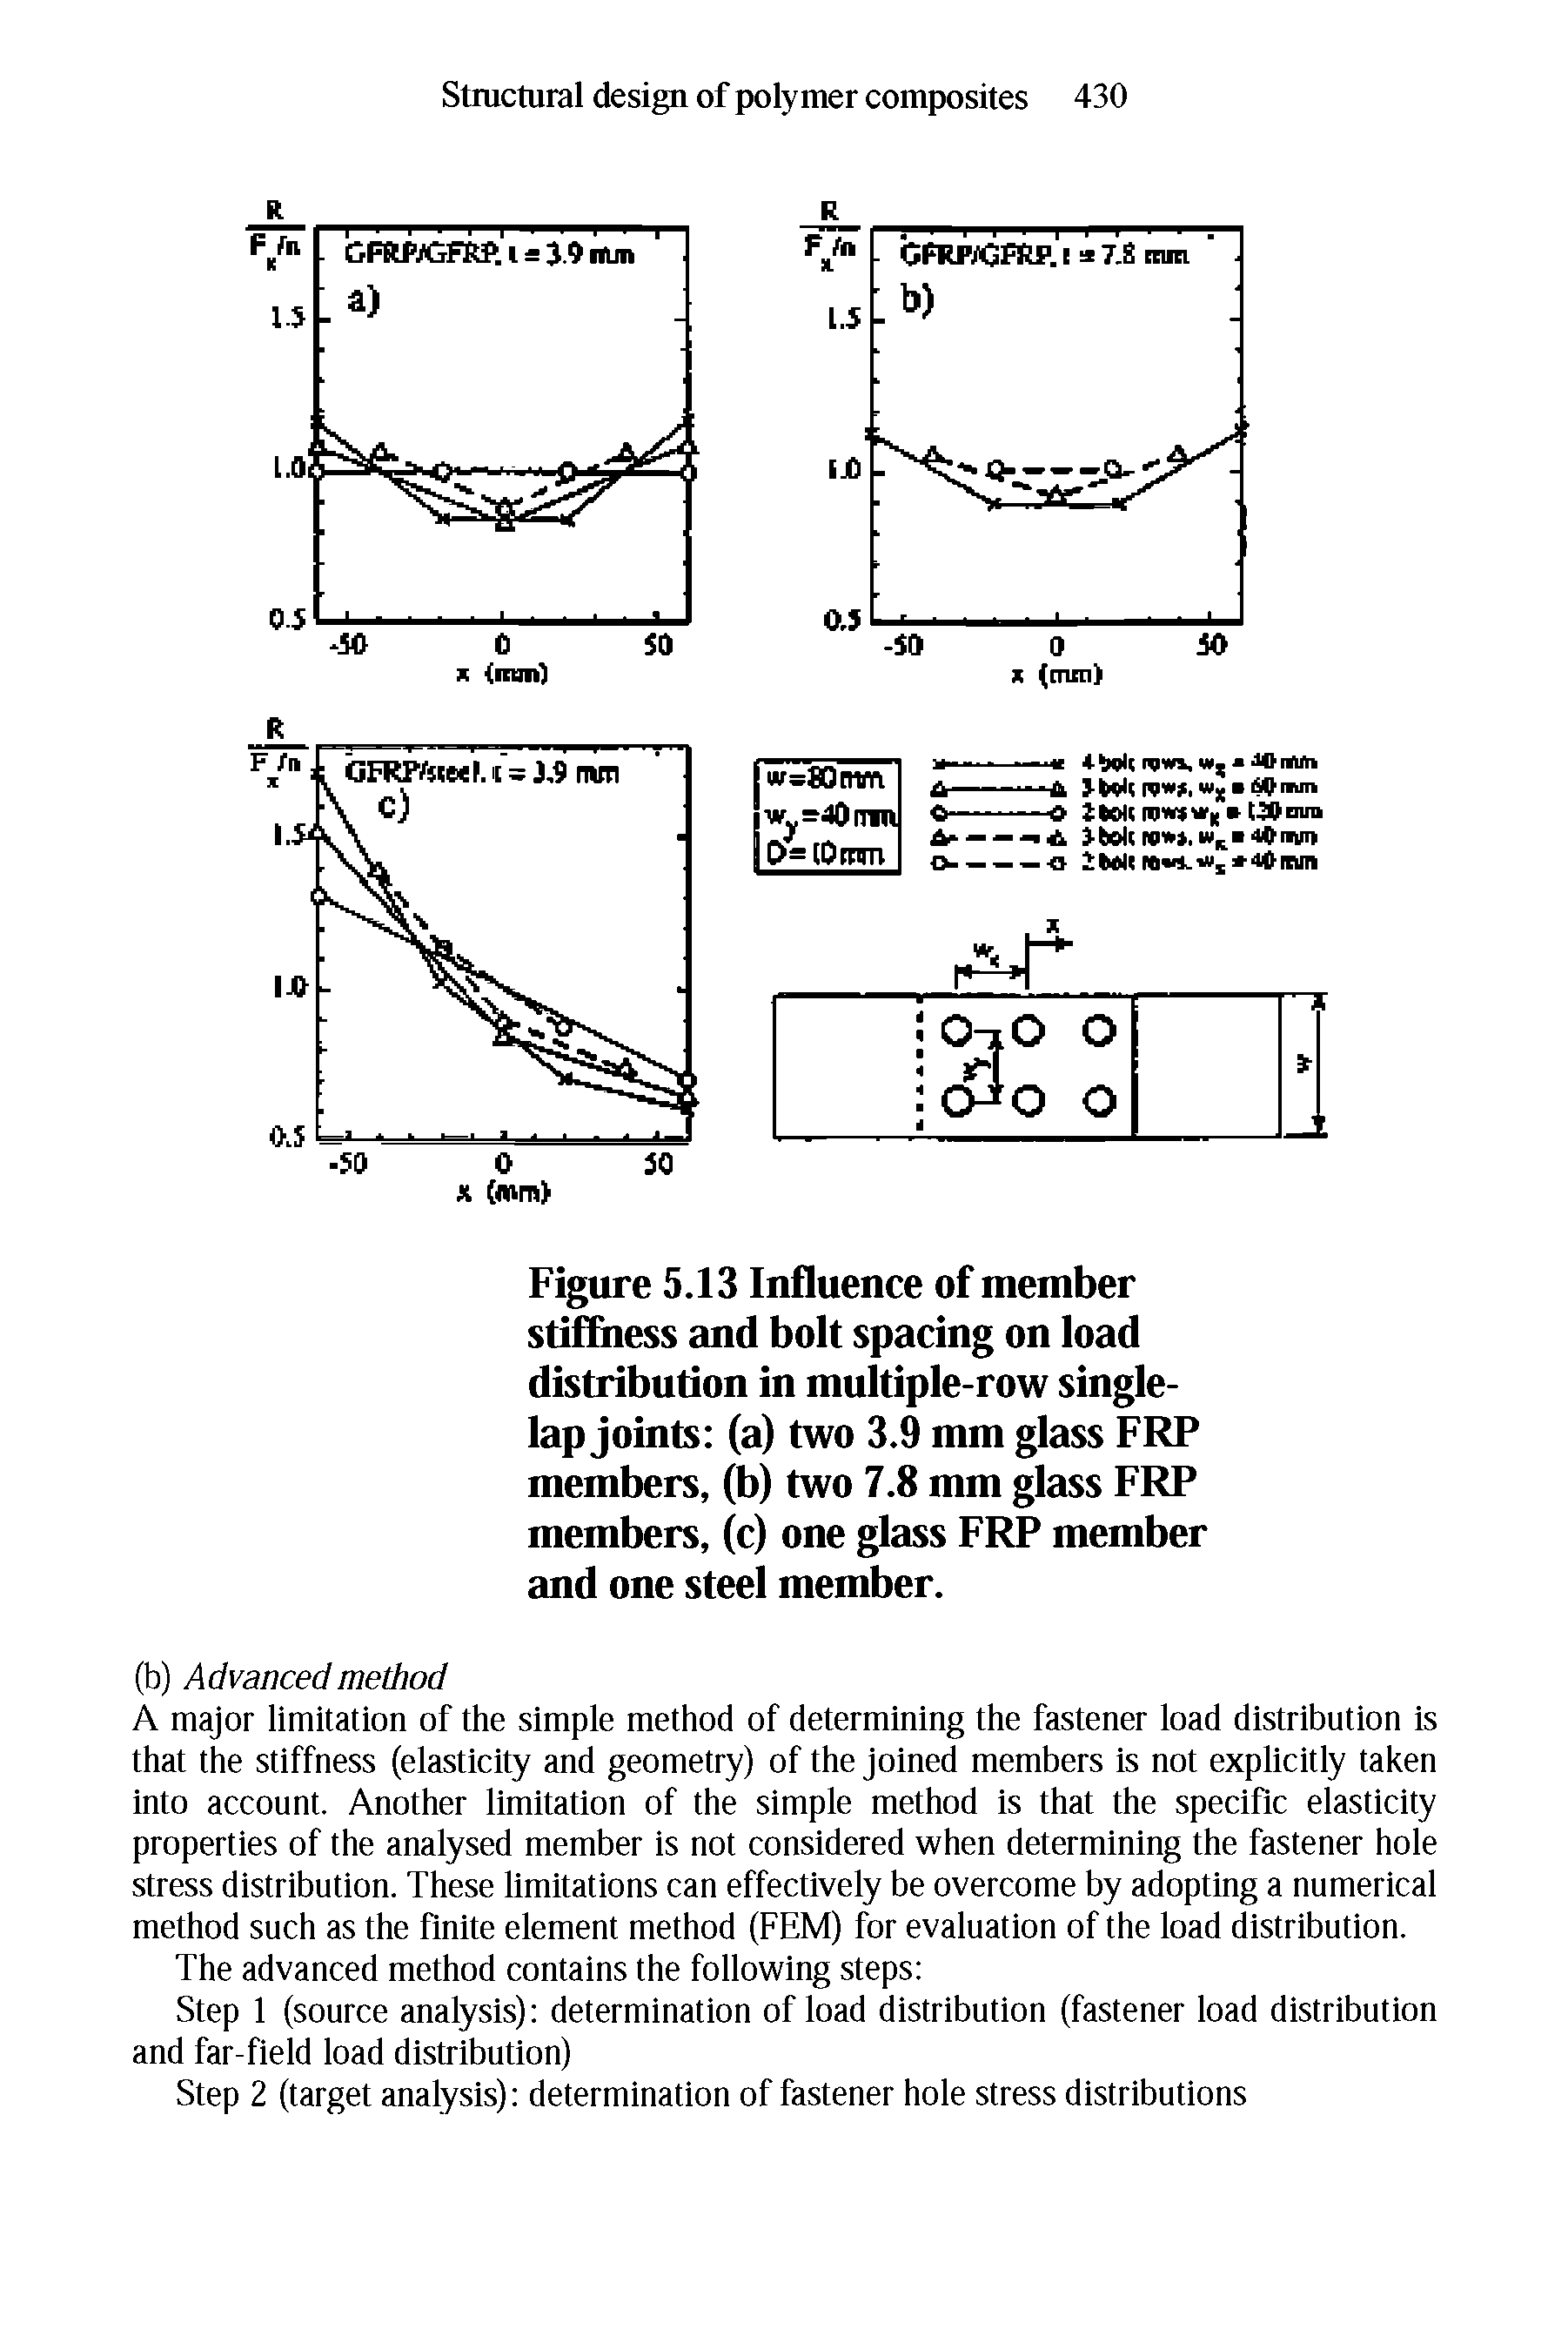 Figure 5.13 Influence of member stiffness and bolt spacing on load distribution in multiple-row singlelap joints (a) two 3.9 mm glass FRP members, (b) two 7.8 mm glass FRP members, (c) one glass FRP member and one steel member.